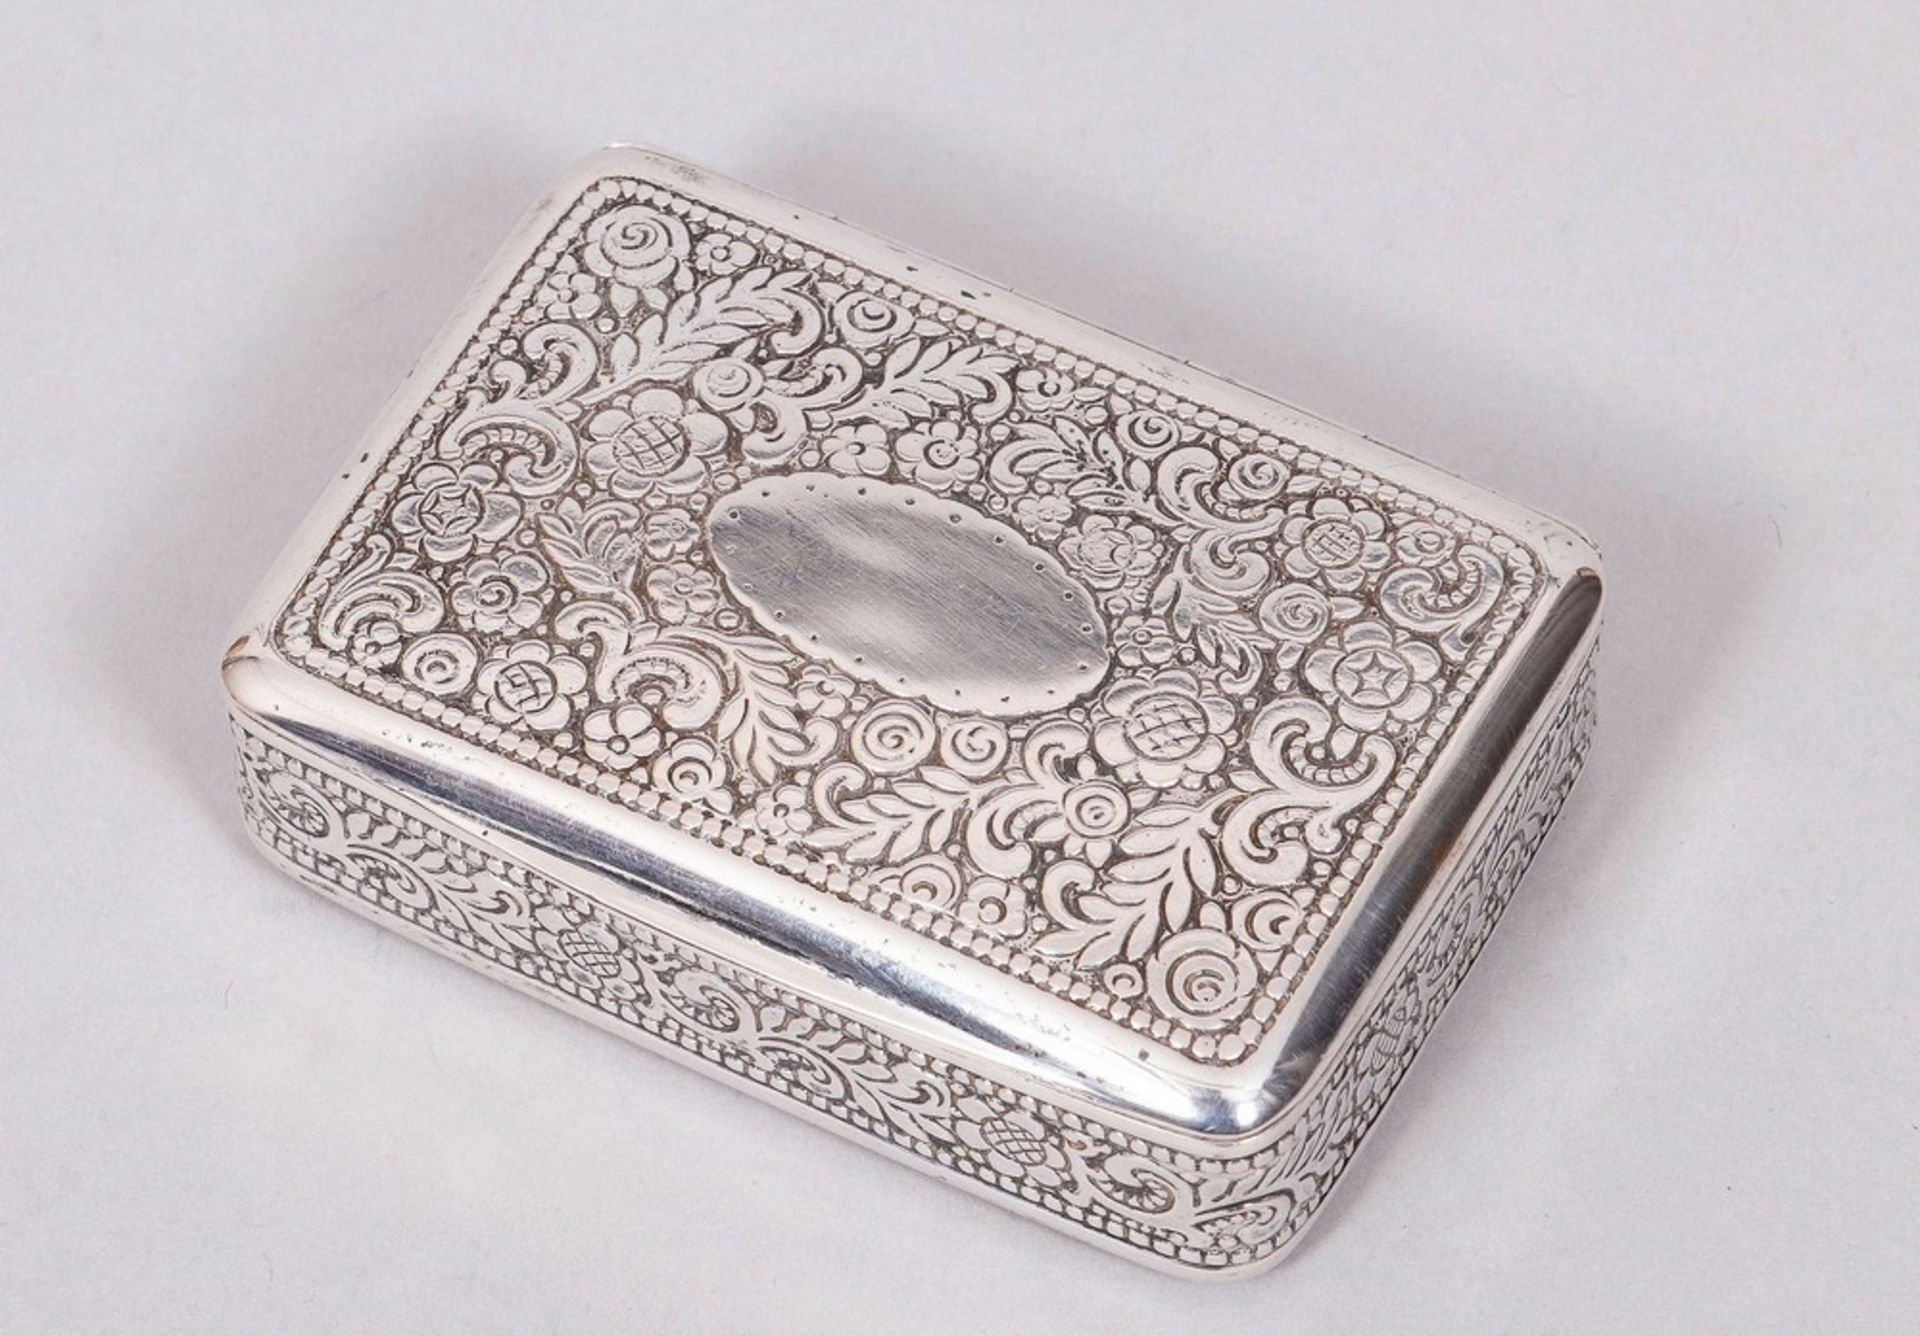 Small lidded box, 800 silver, partially gilt, German, early 20th C.